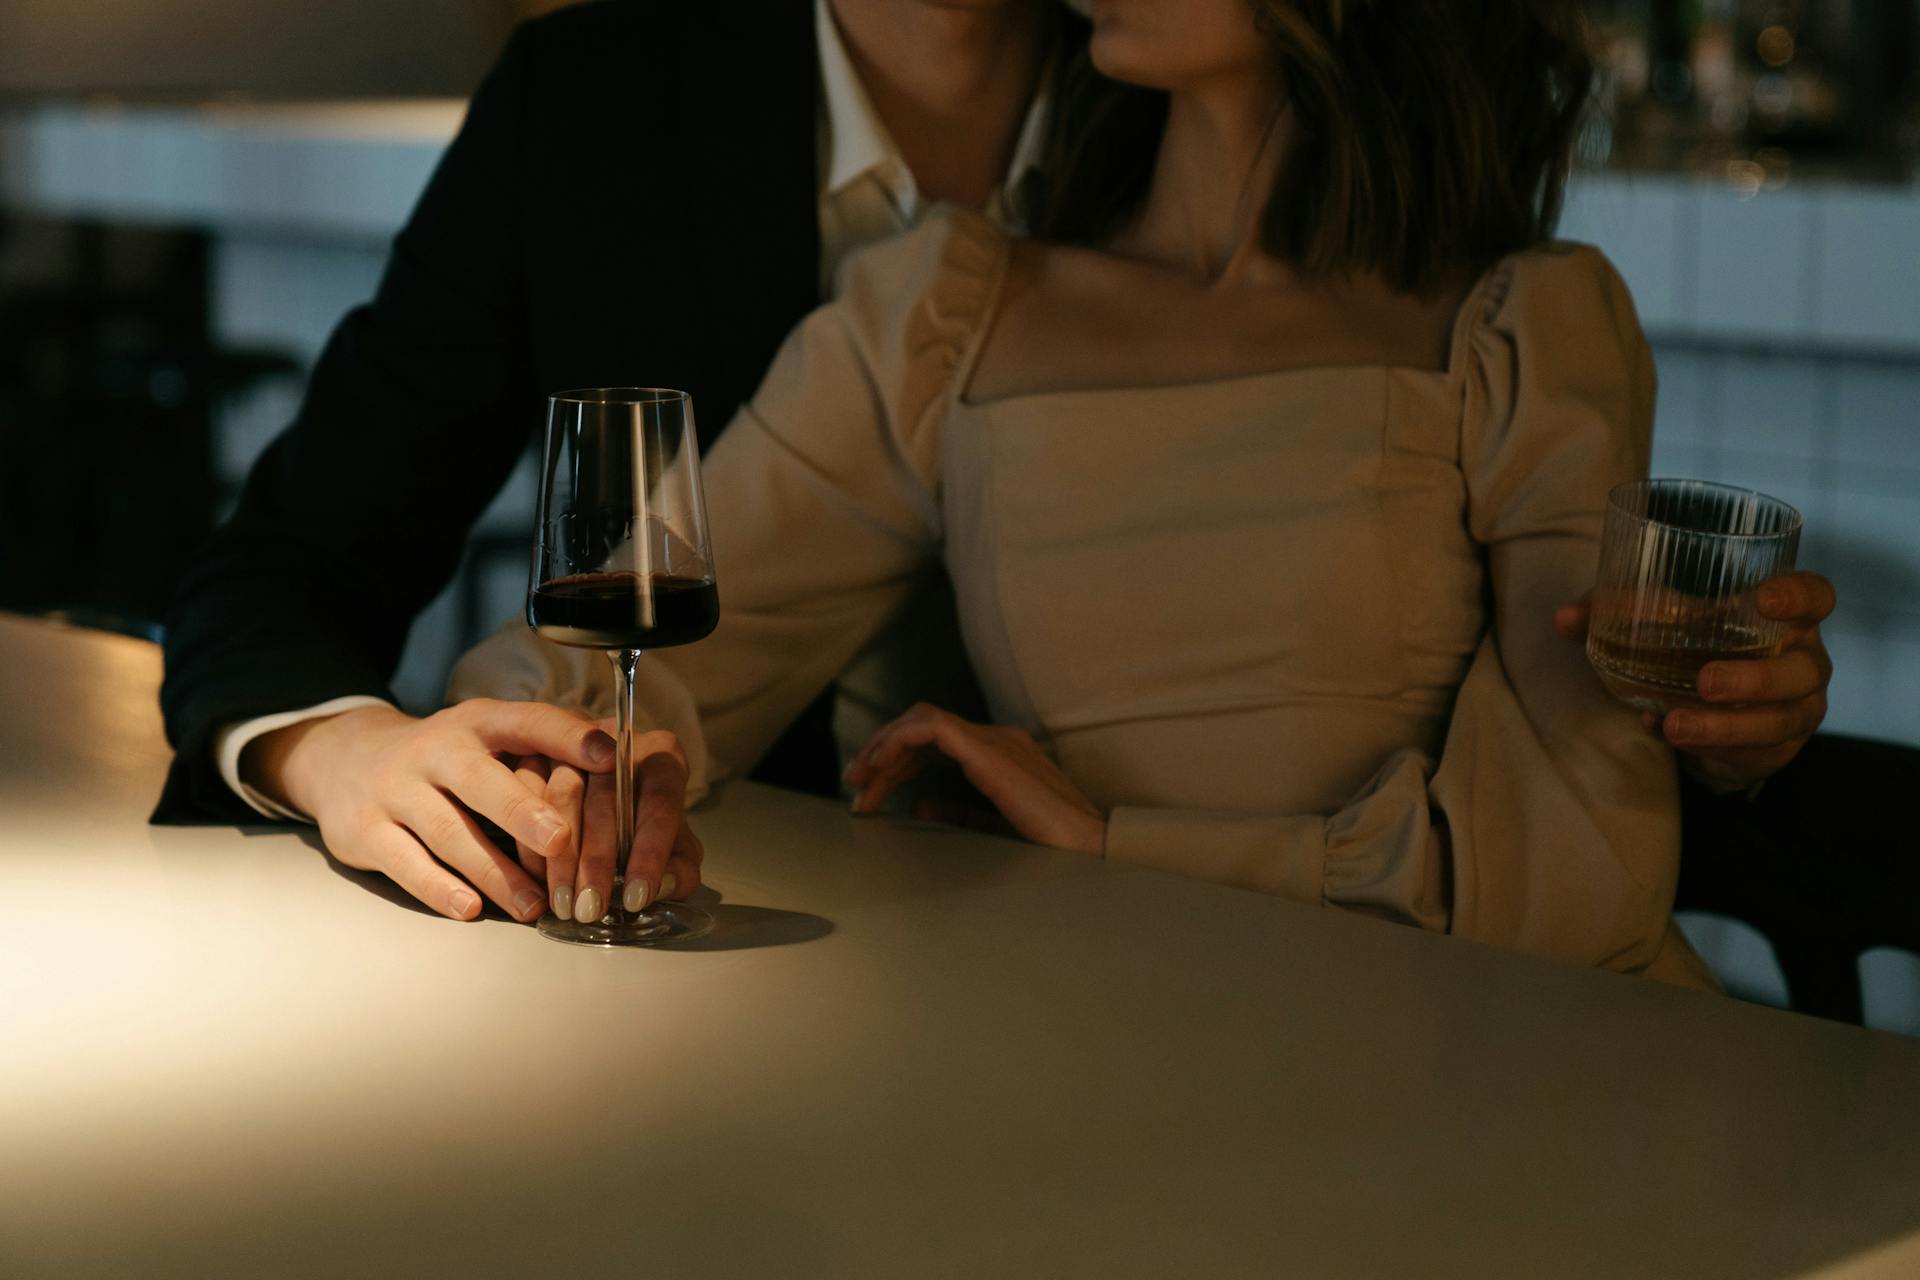 Man and woman kissing in a pub | Source: Pexels